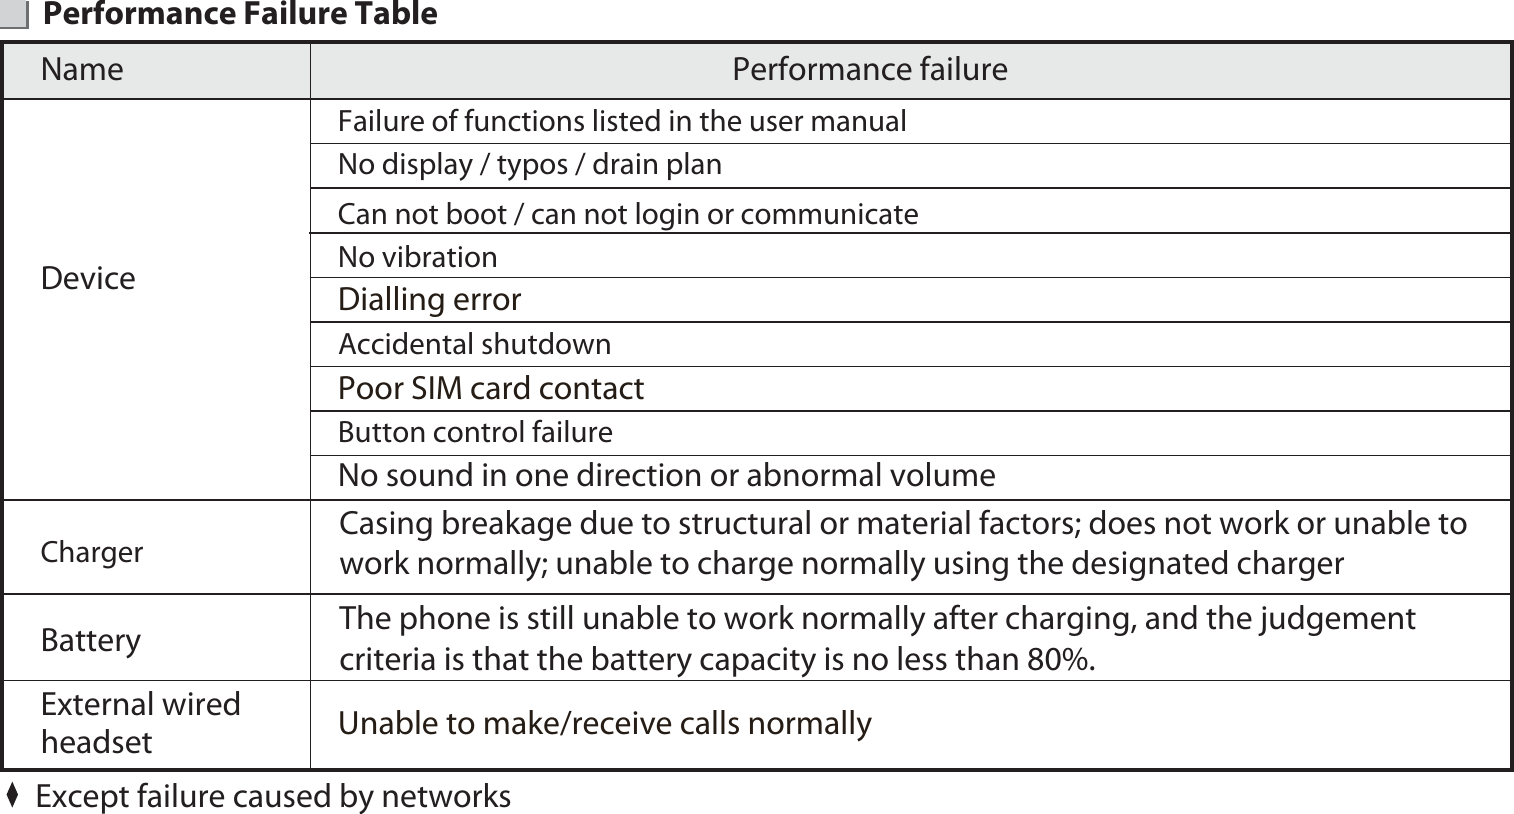 29Name Performance failureDeviceFailure of functions listed in the user manualNo display / typos / drain planCan not boot / can not login or communicateNo vibrationDialling errorAccidental shutdownButton control failureNo sound in one direction or abnormal volume Unable to make/receive calls normallyPoor SIM card contactChargerBatteryExternal wired headsetExcept failure caused by networksPerformance Failure TableCasing breakage due to structural or material factors; does not work or unable to work normally; unable to charge normally using the designated charger The phone is still unable to work normally after charging, and the judgement criteria is that the battery capacity is no less than 80%.